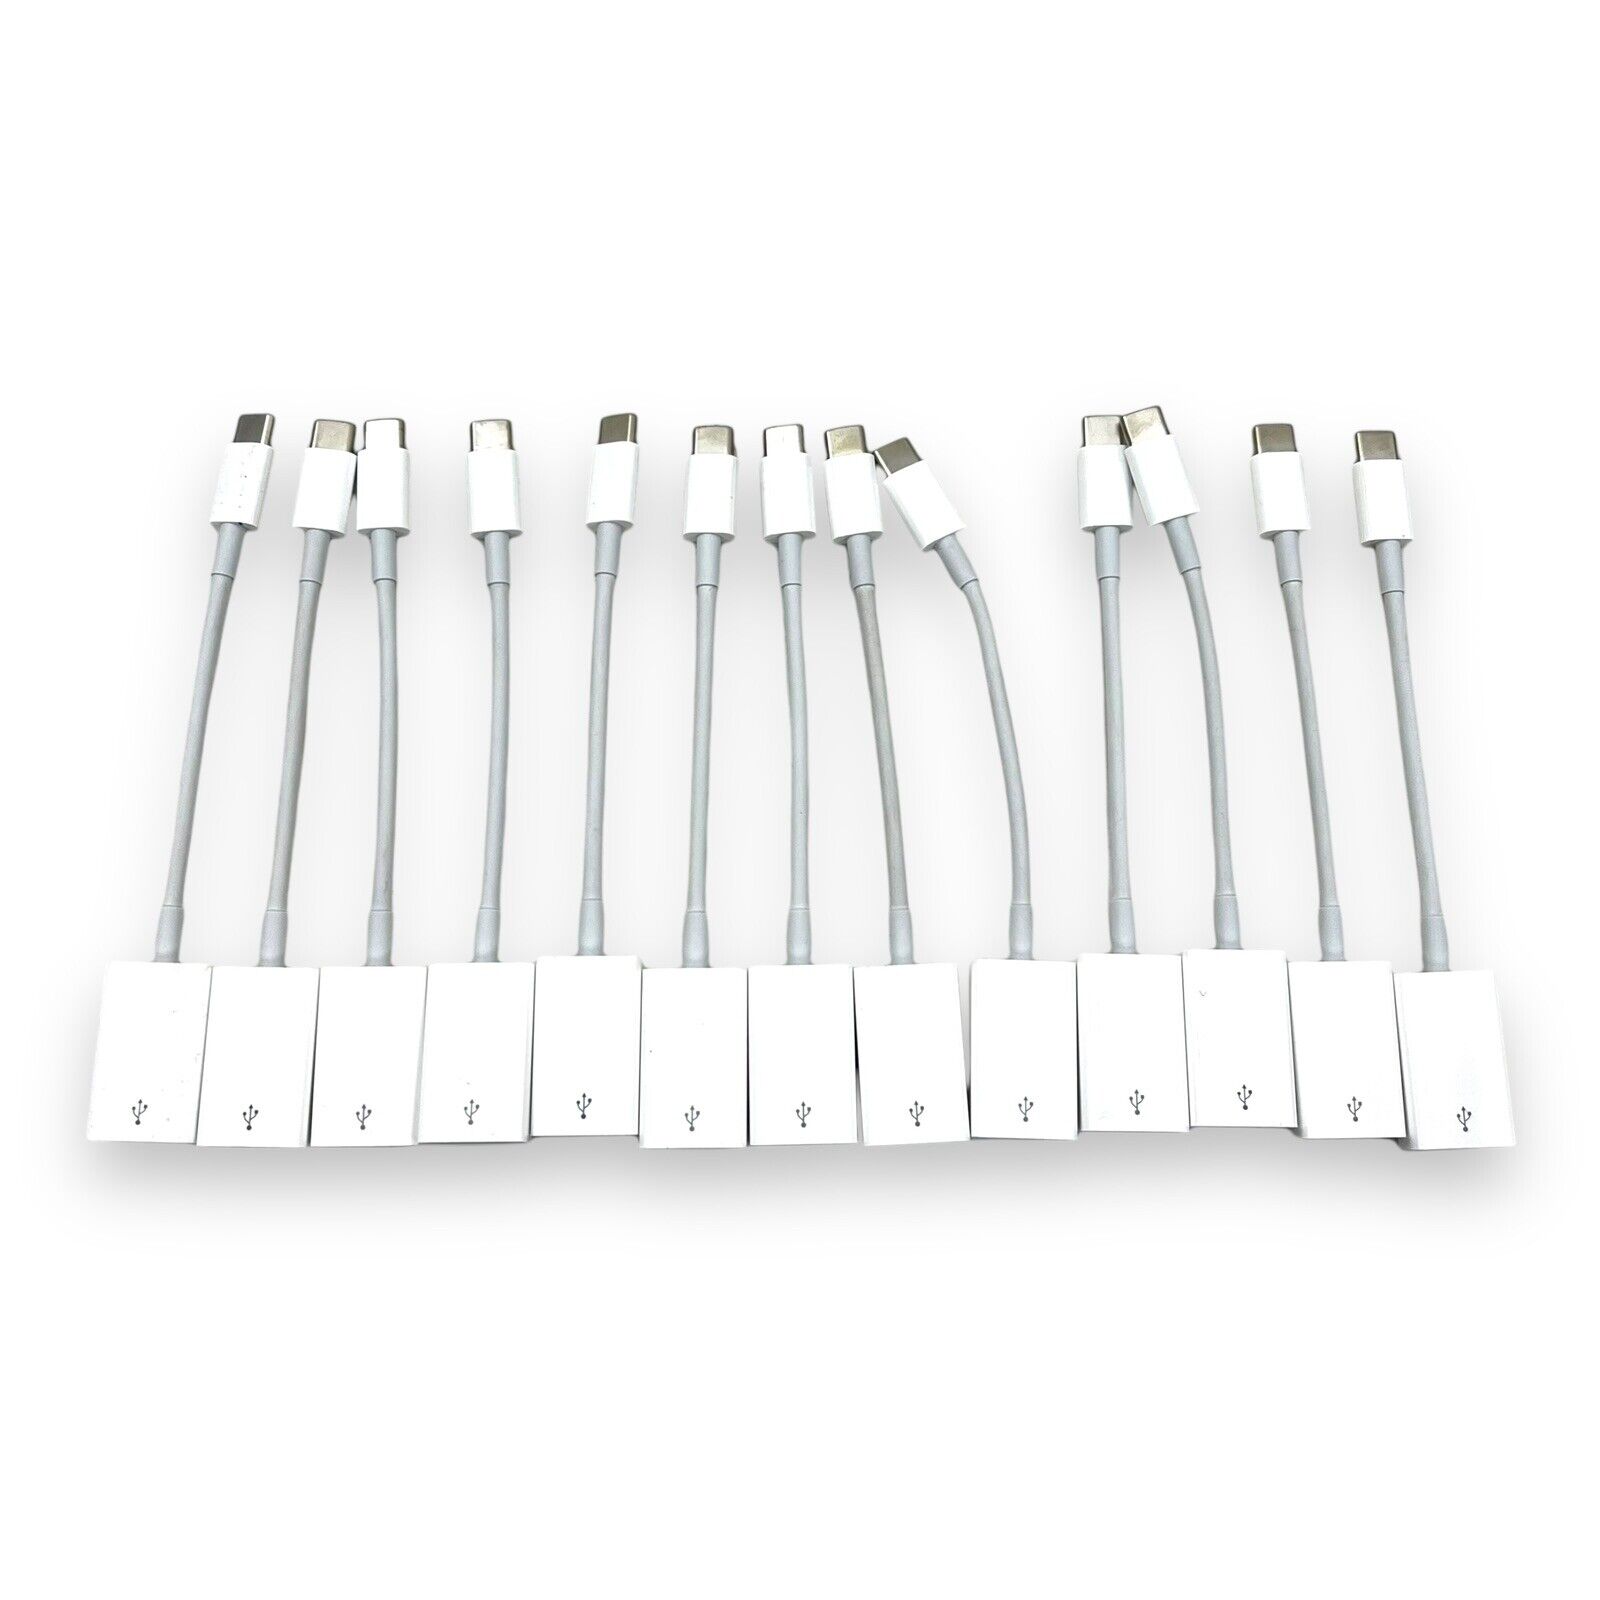 Lot of 13 Genuine Apple MJ1M2AM/A USB-C to USB Adapter